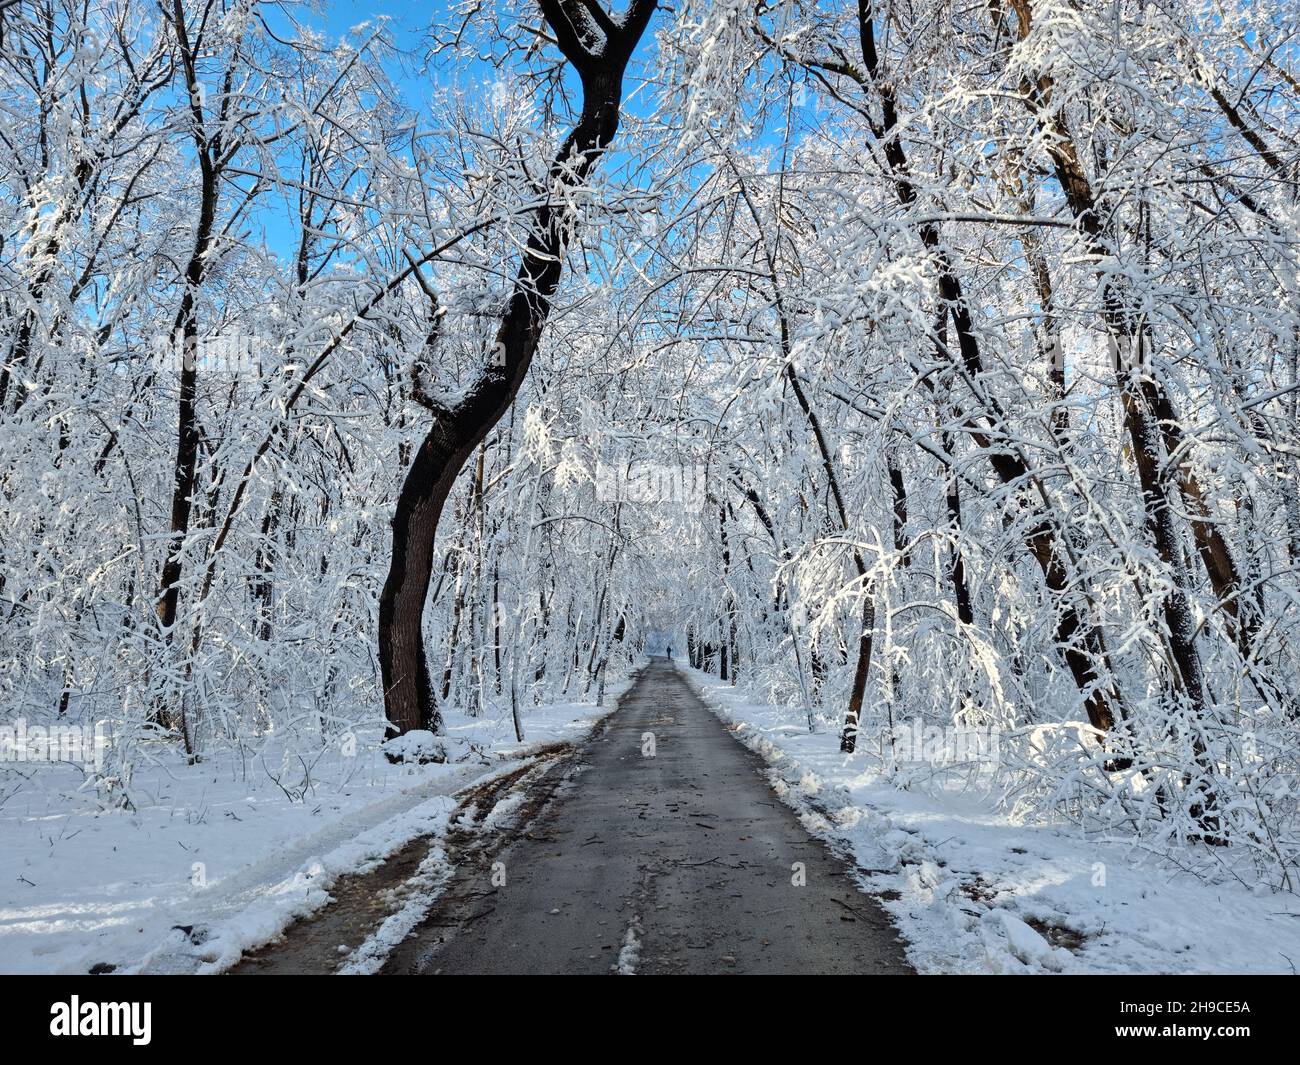 Little narrow countryside road in a snowy frozen forest Stock Photo